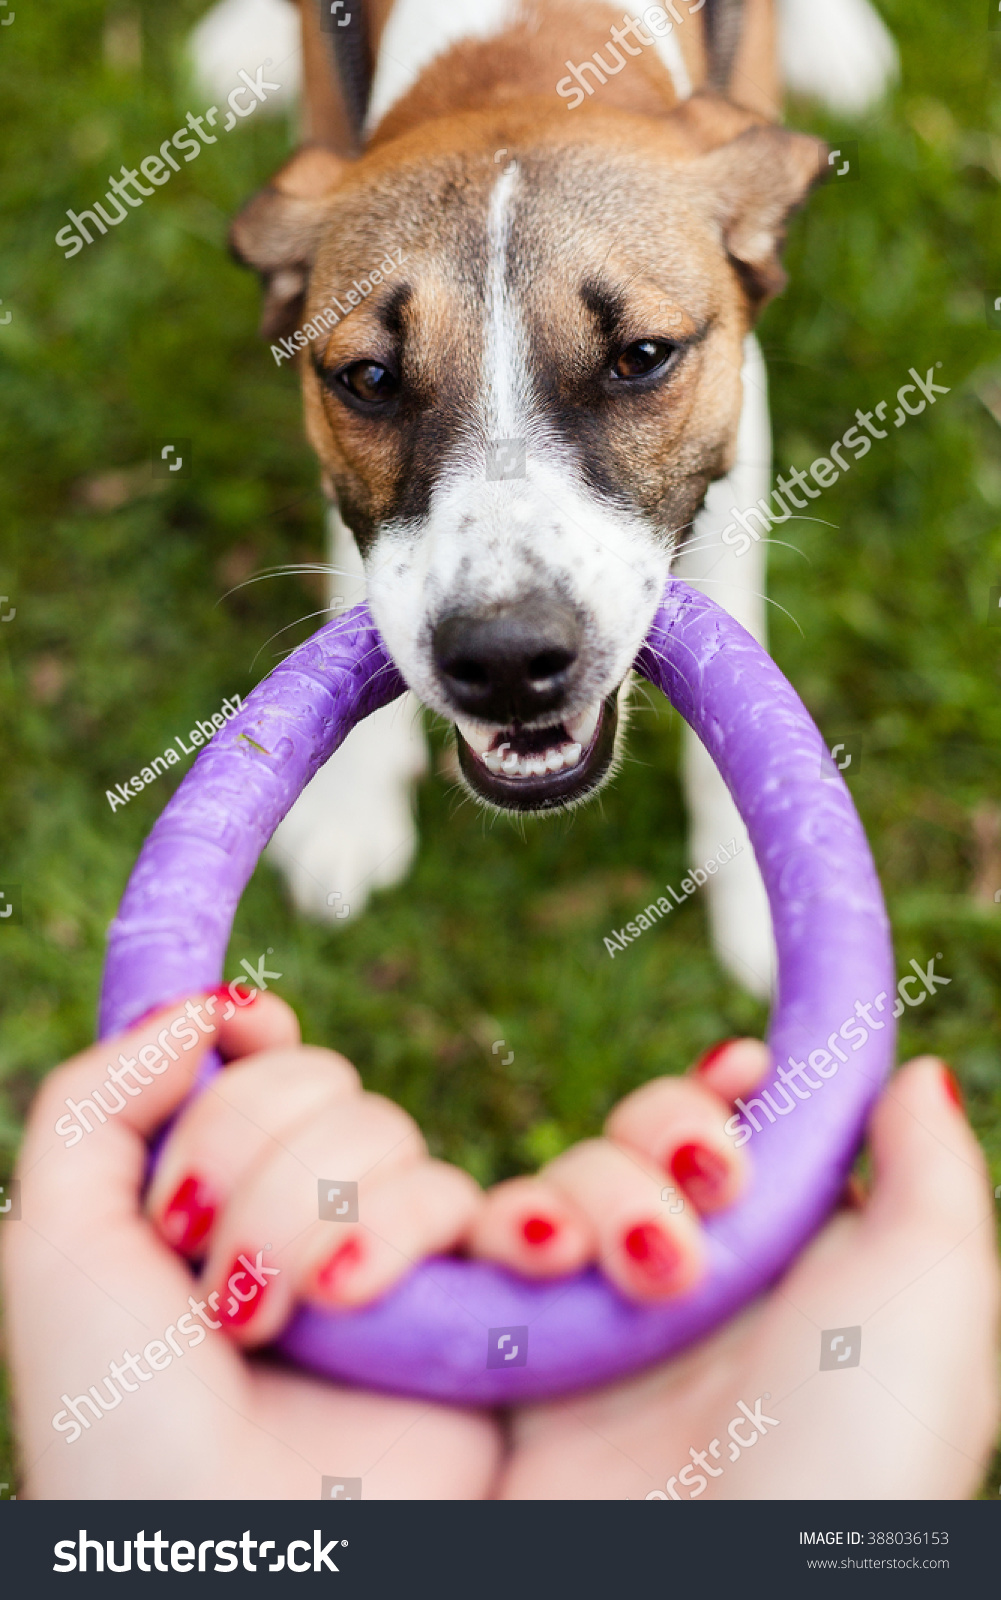 dog rubber ring